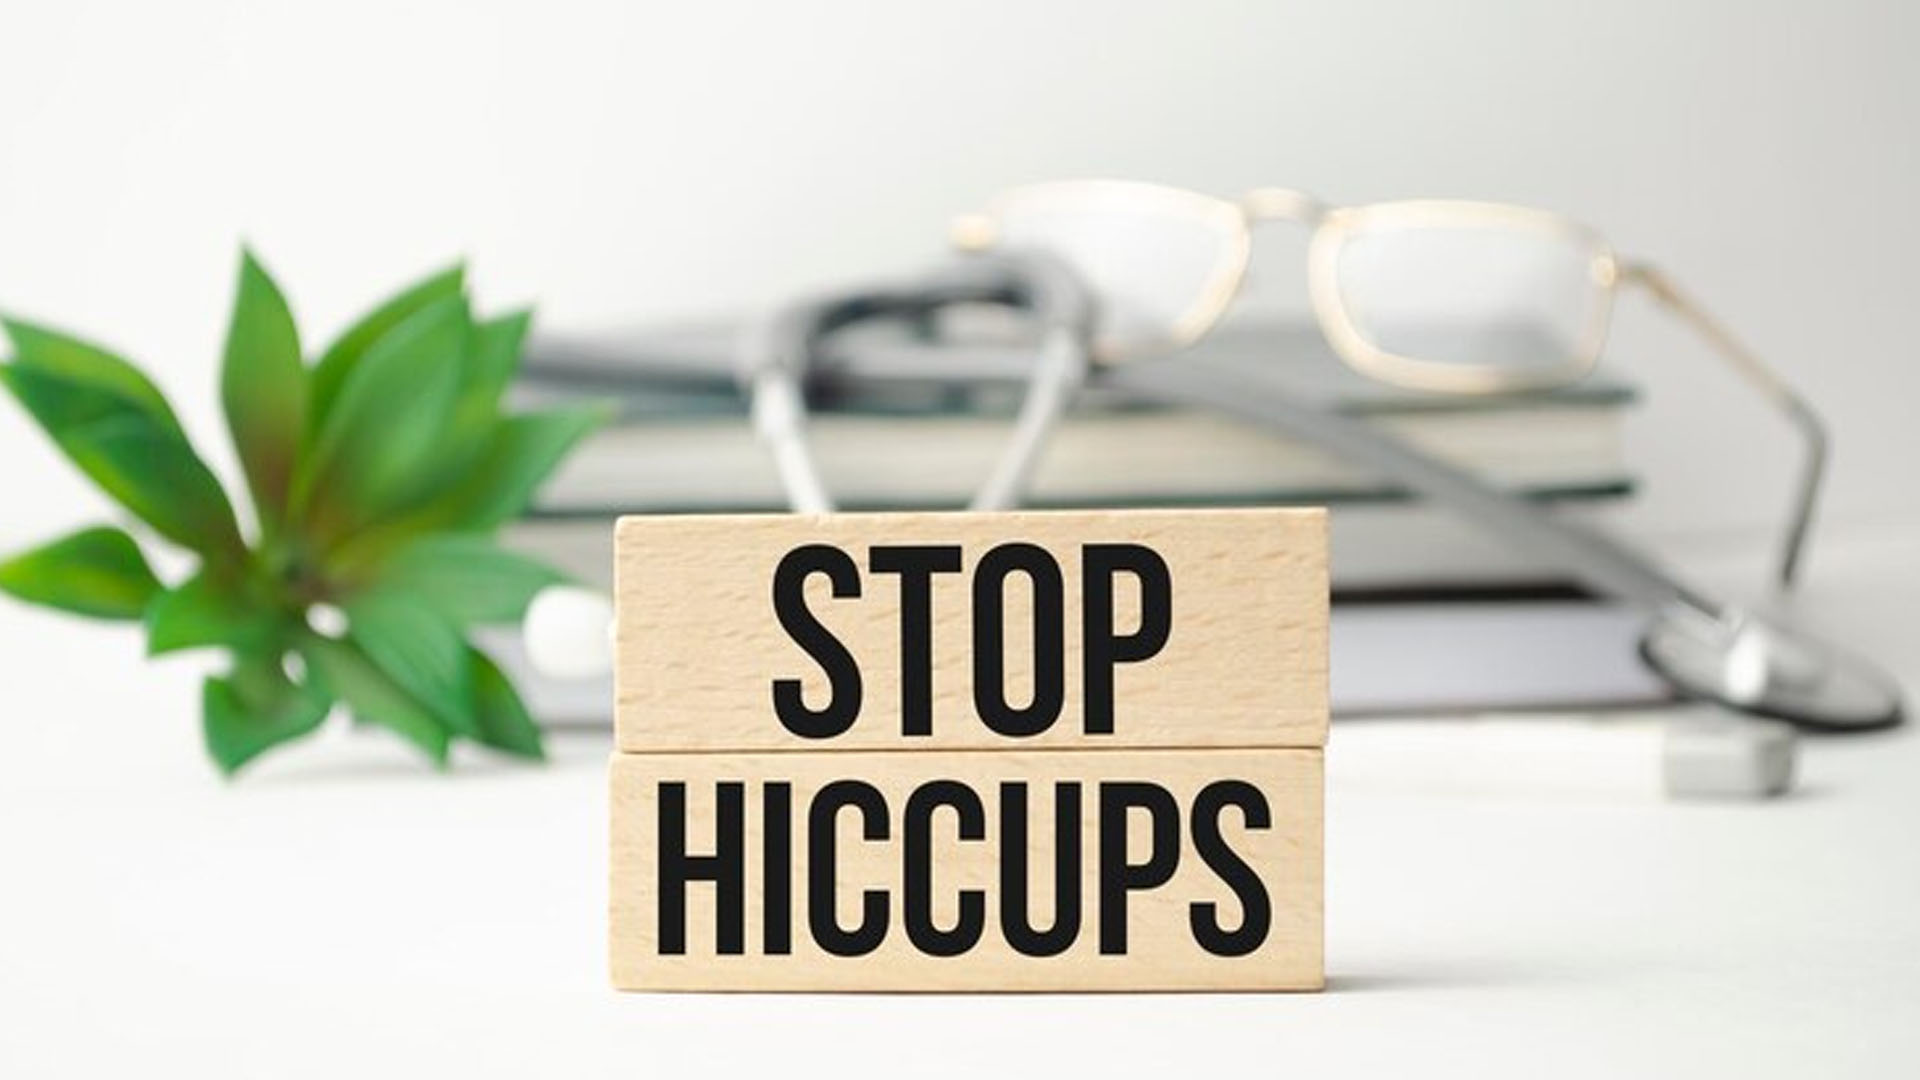 What are the Home Remedies to Stop Hiccups?